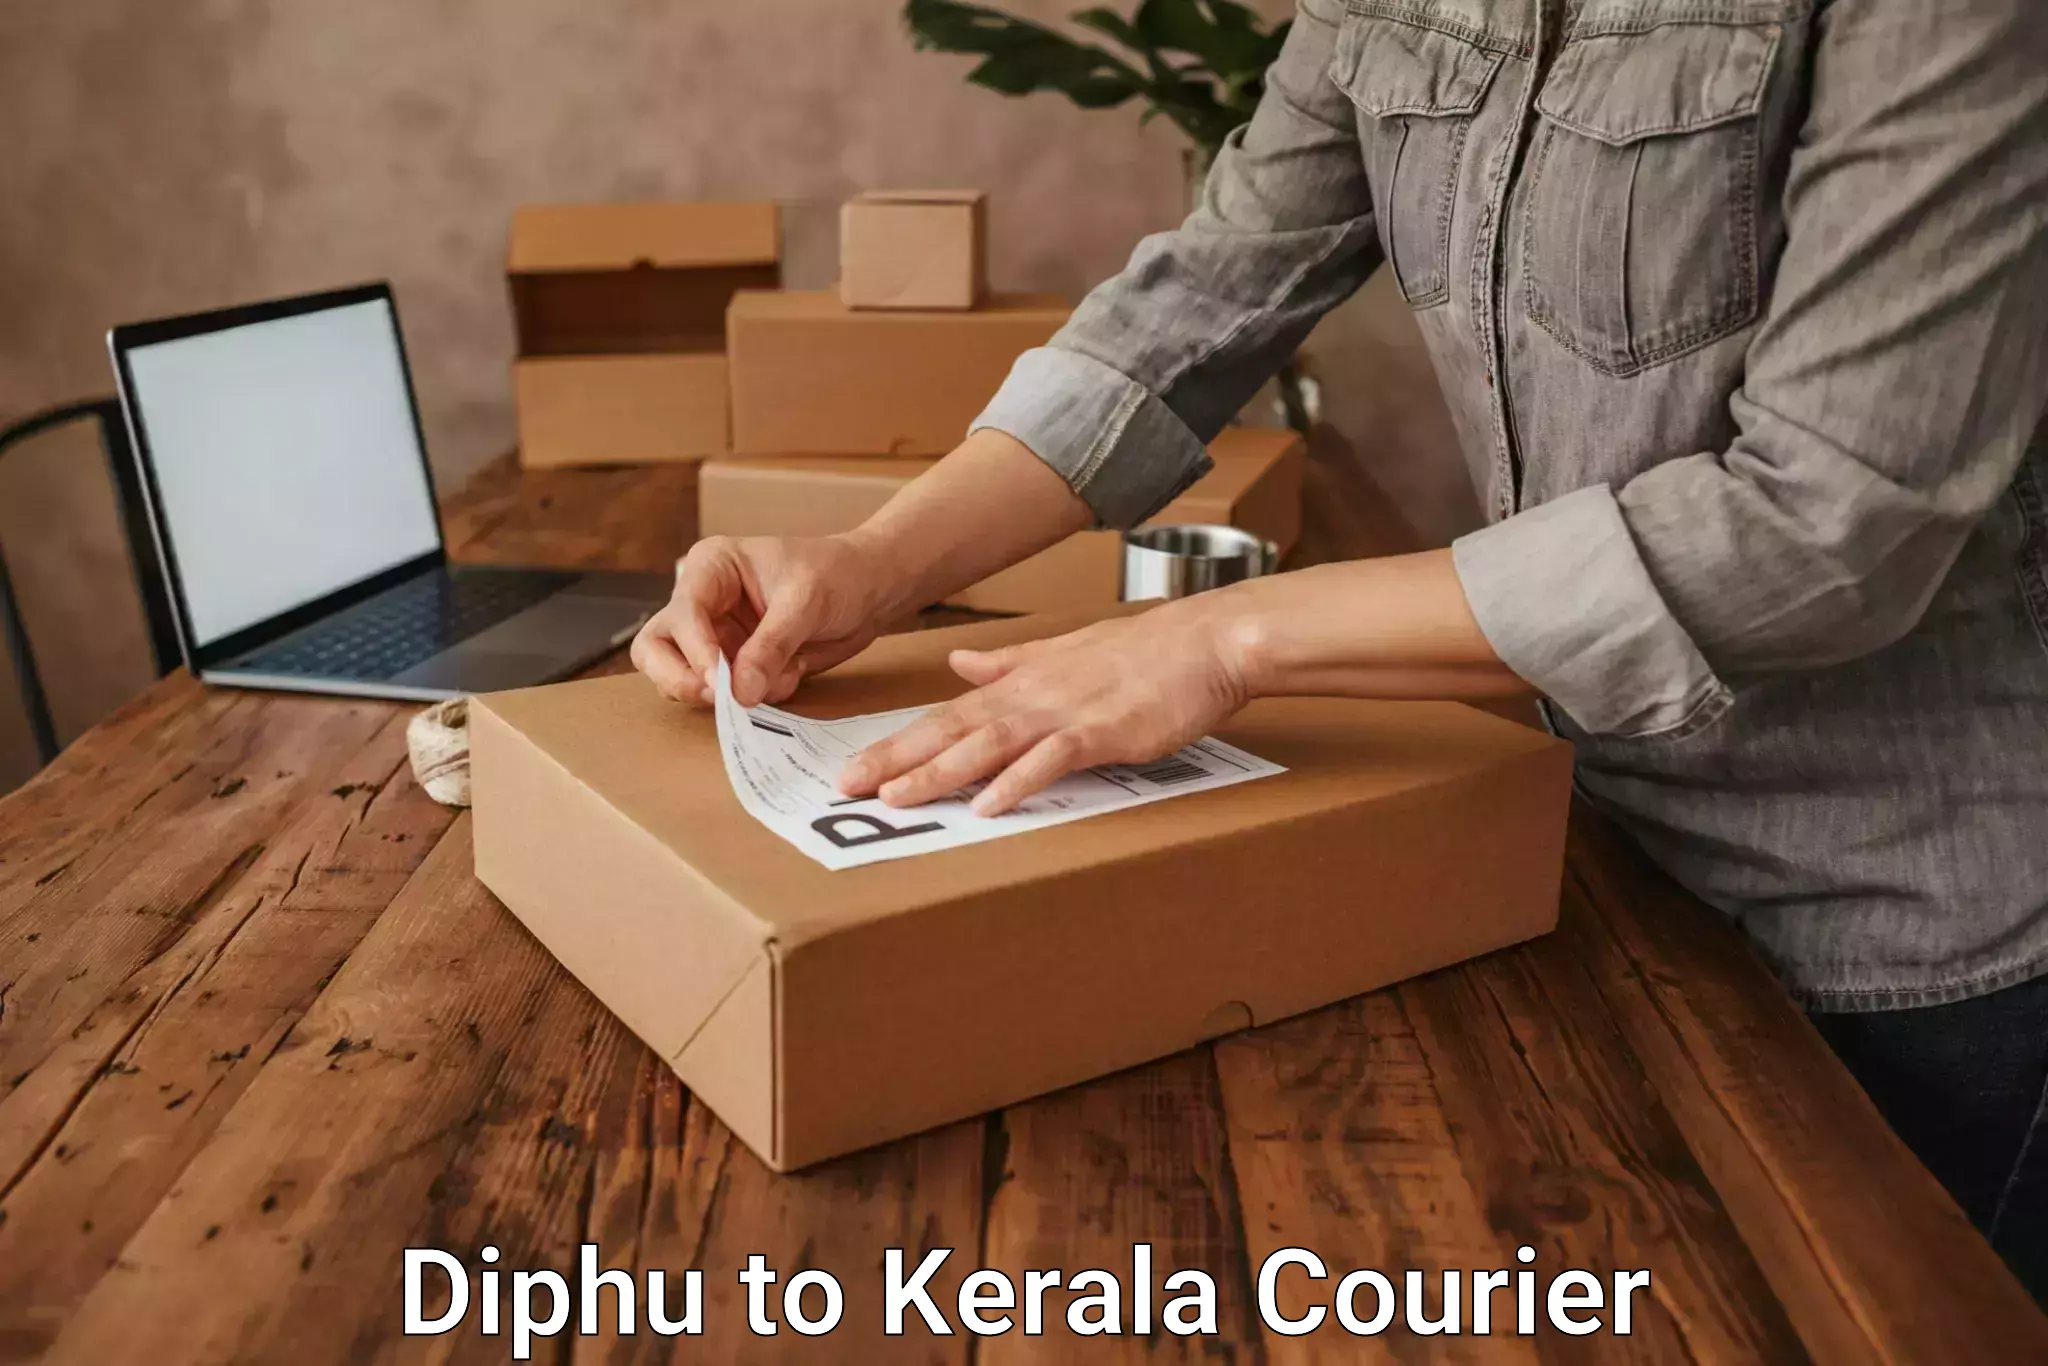 Round-the-clock parcel delivery Diphu to Kerala